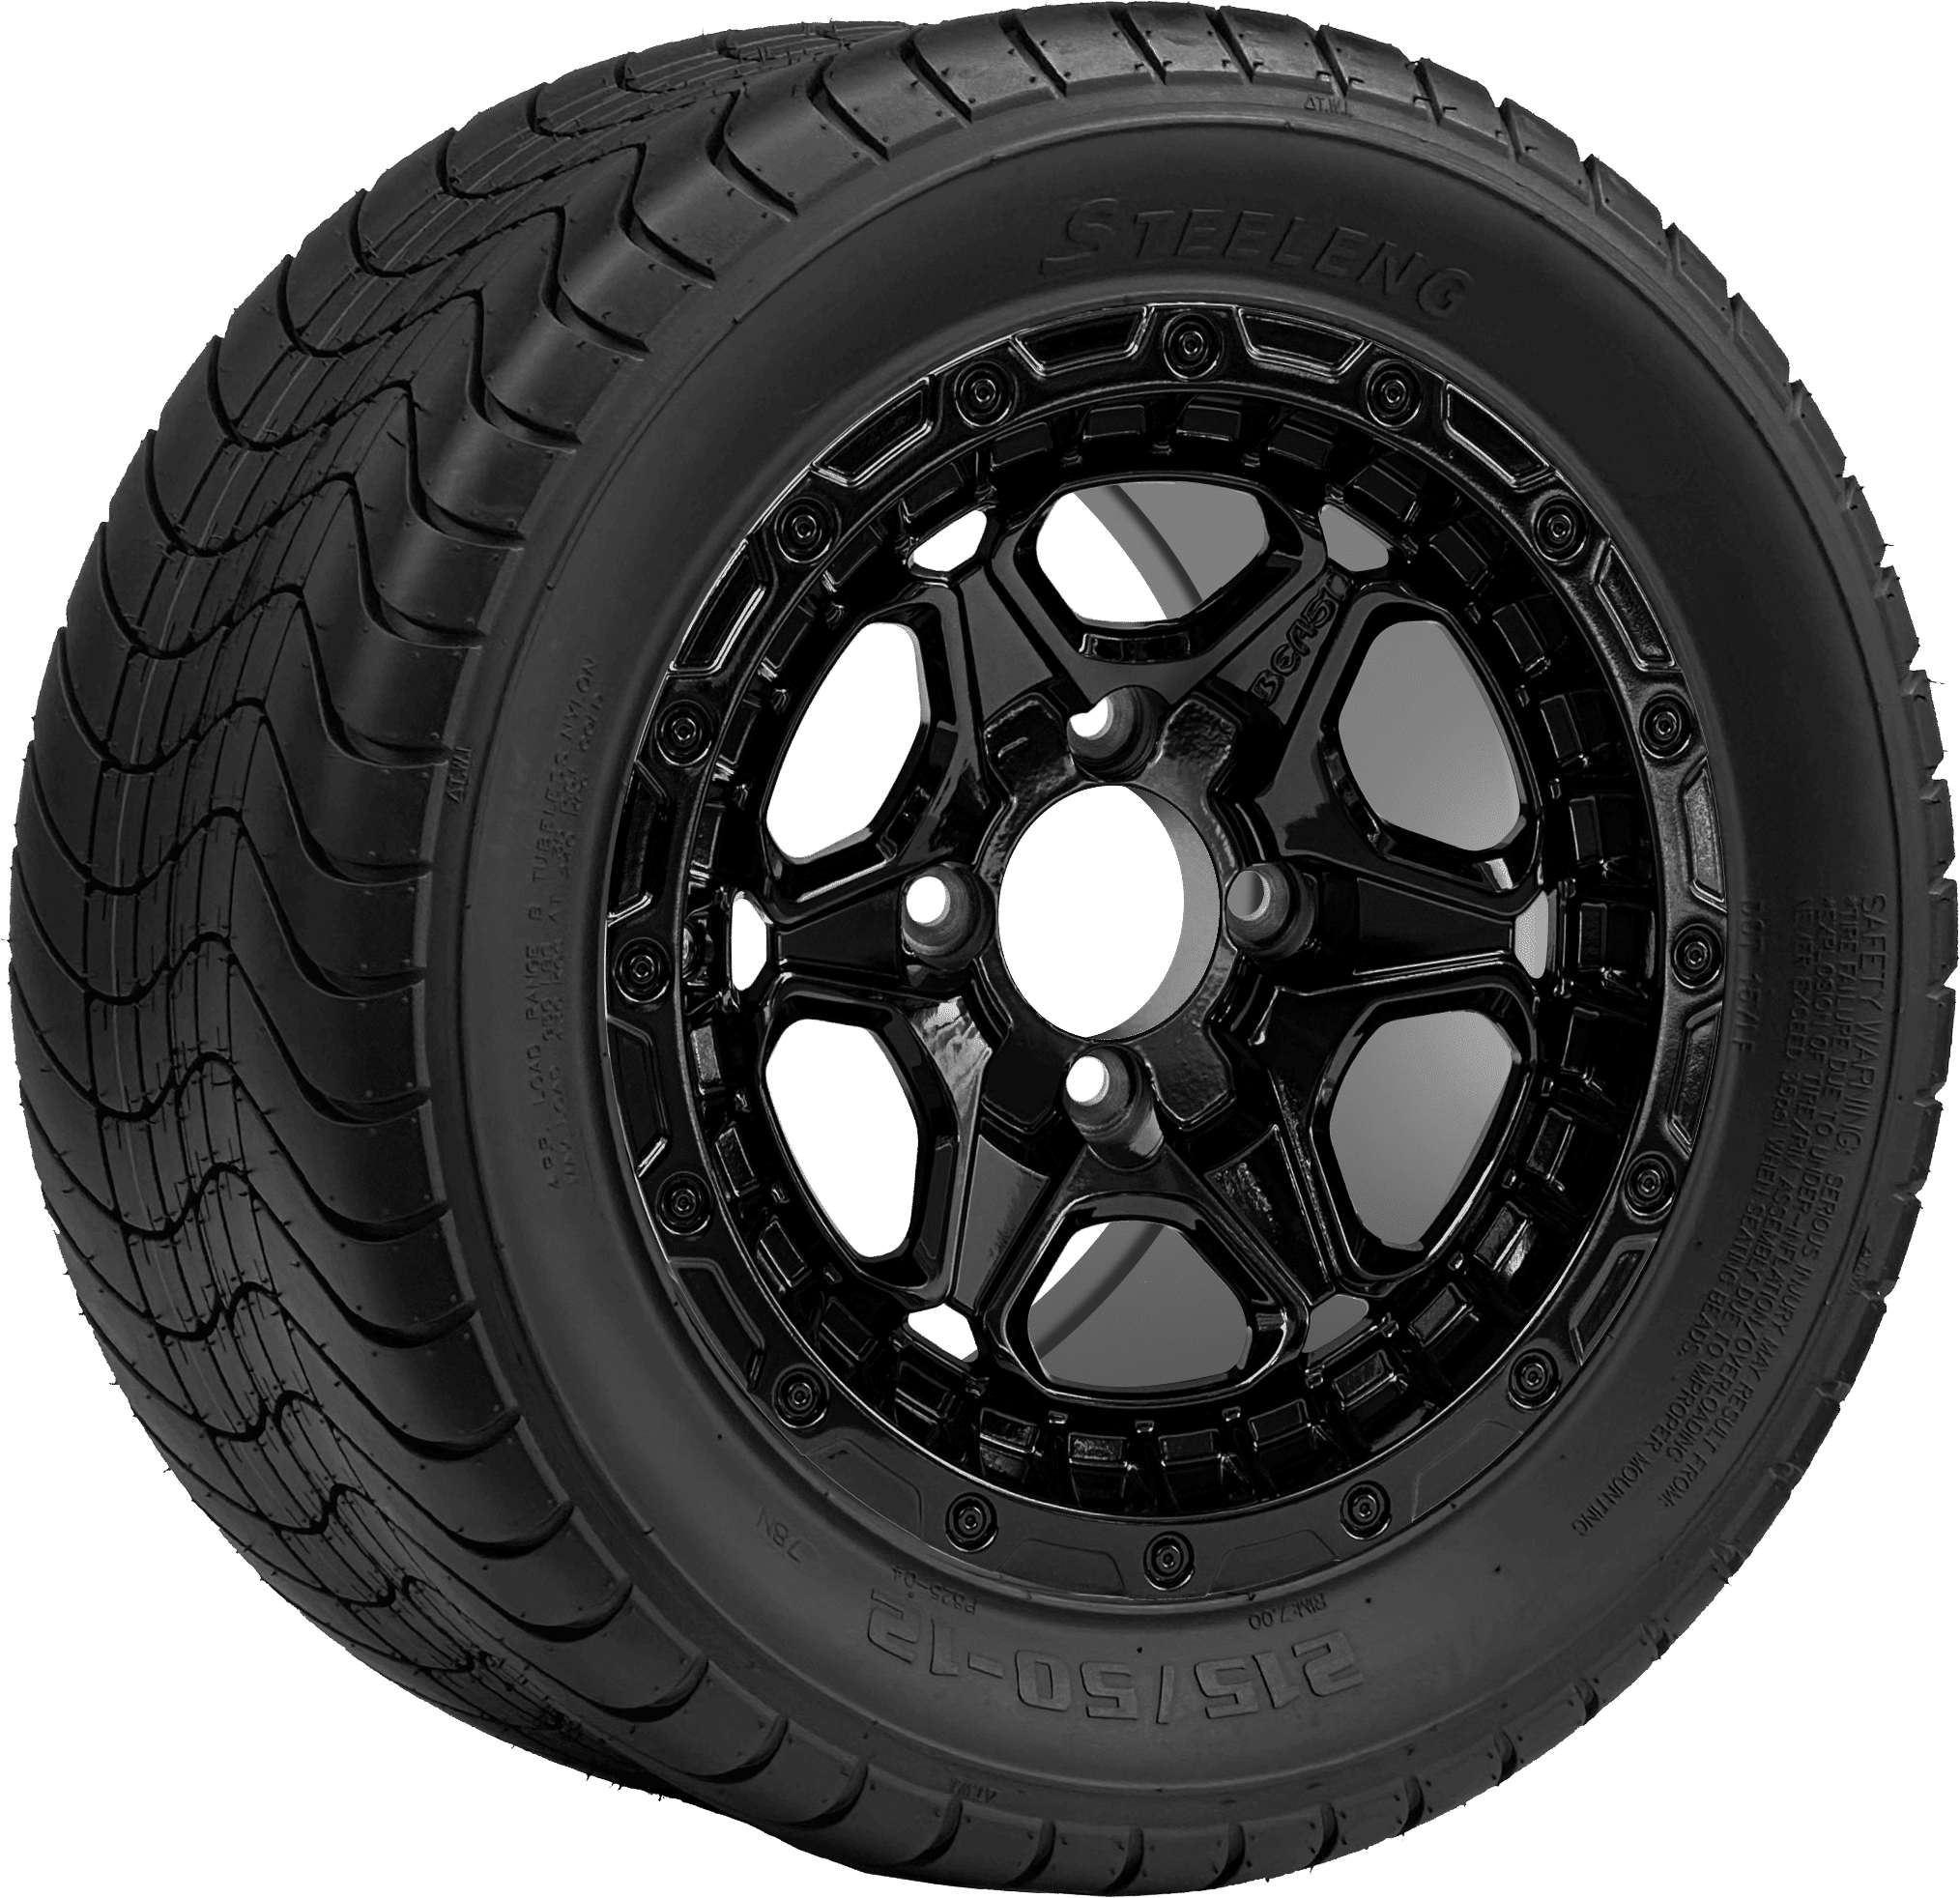 BNDL-TR1213-WH1264-CC0027-LN0002 12″ GRIZZLY GLOSSY BLACK WHEEL – ALUMINUM ALLOY / STEELENG 215/50-12 COMFORT RIDE STREET TIRE DOT APPROVED